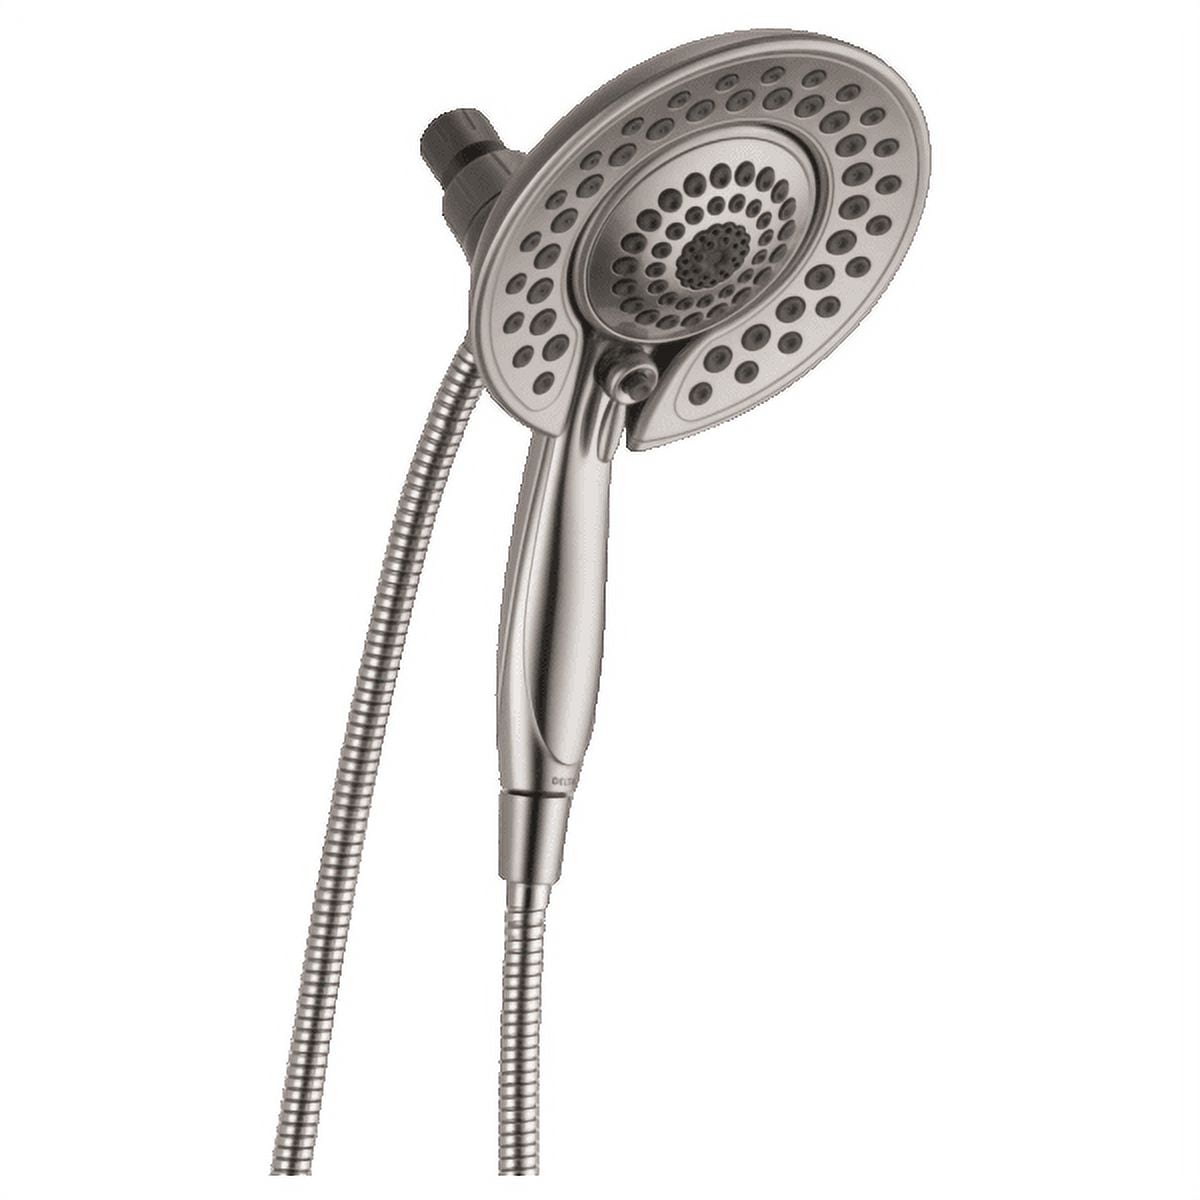 Rp62088ss Brilliance Stainless In2ition Two In One Multi Function Shower Head & Handshower